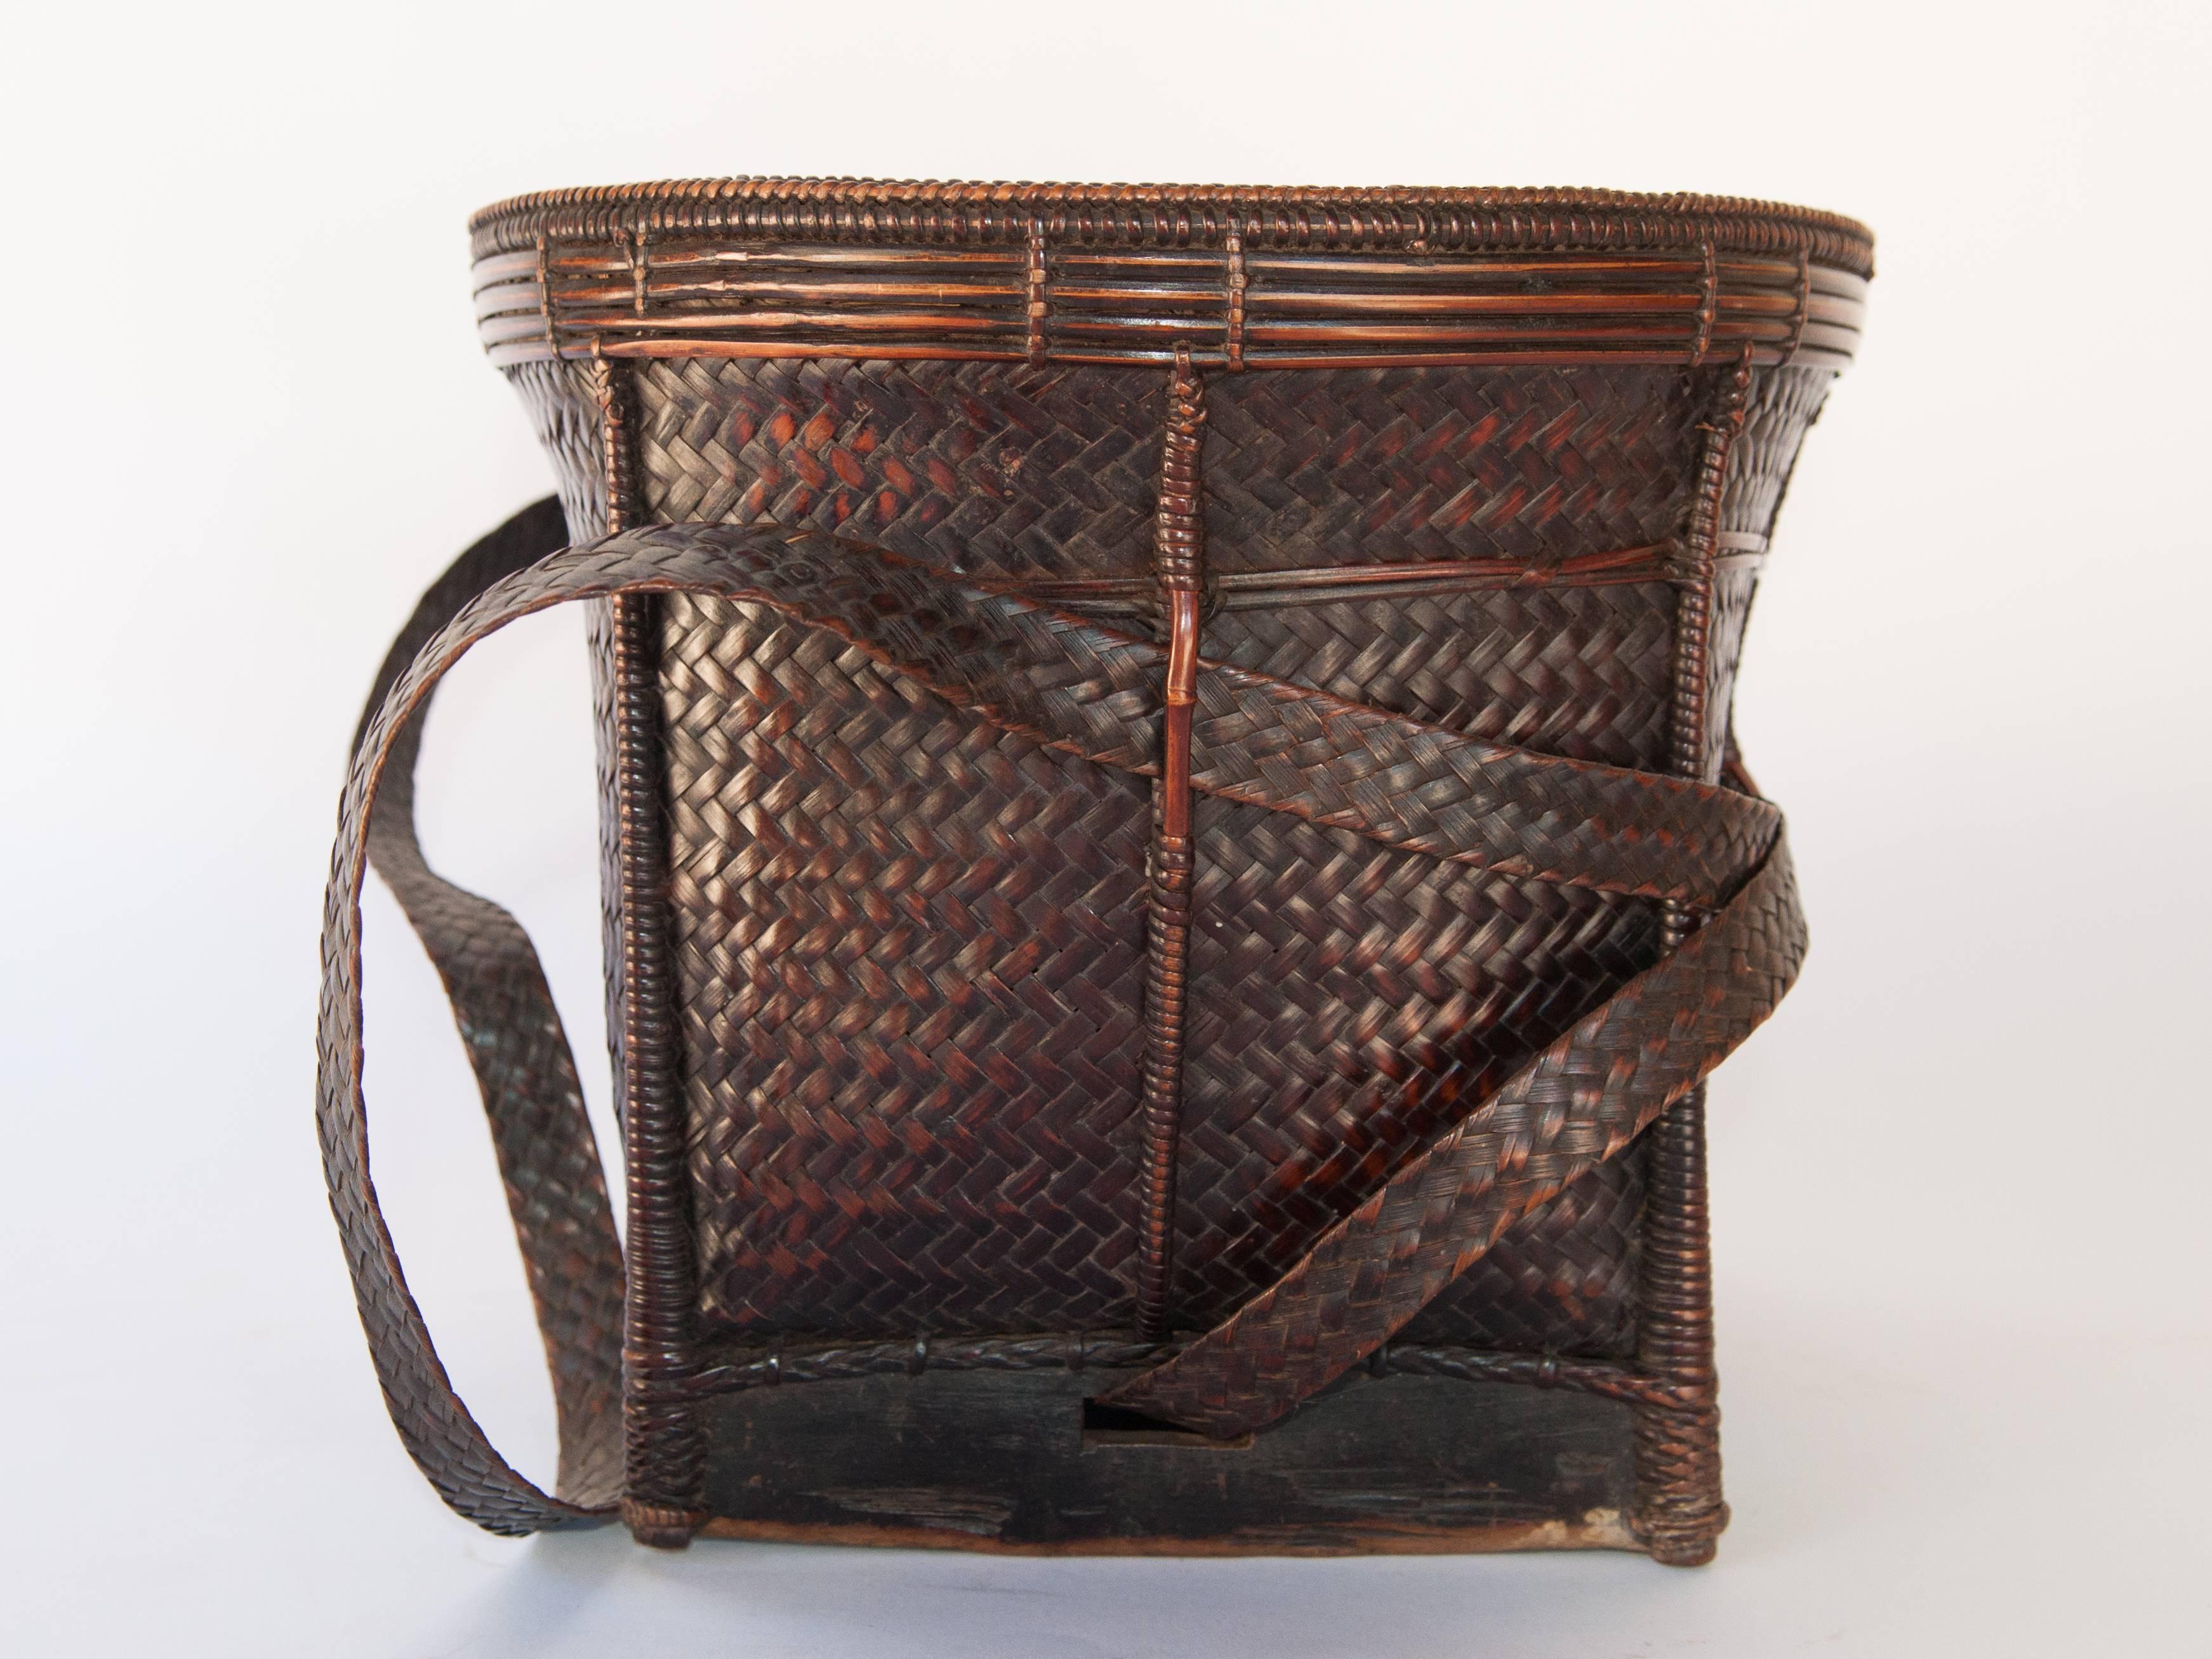 Hand-Crafted Vintage Collecting Basket, Ata Pue, Laos, Mid-20th Century, Bamboo, Rattan